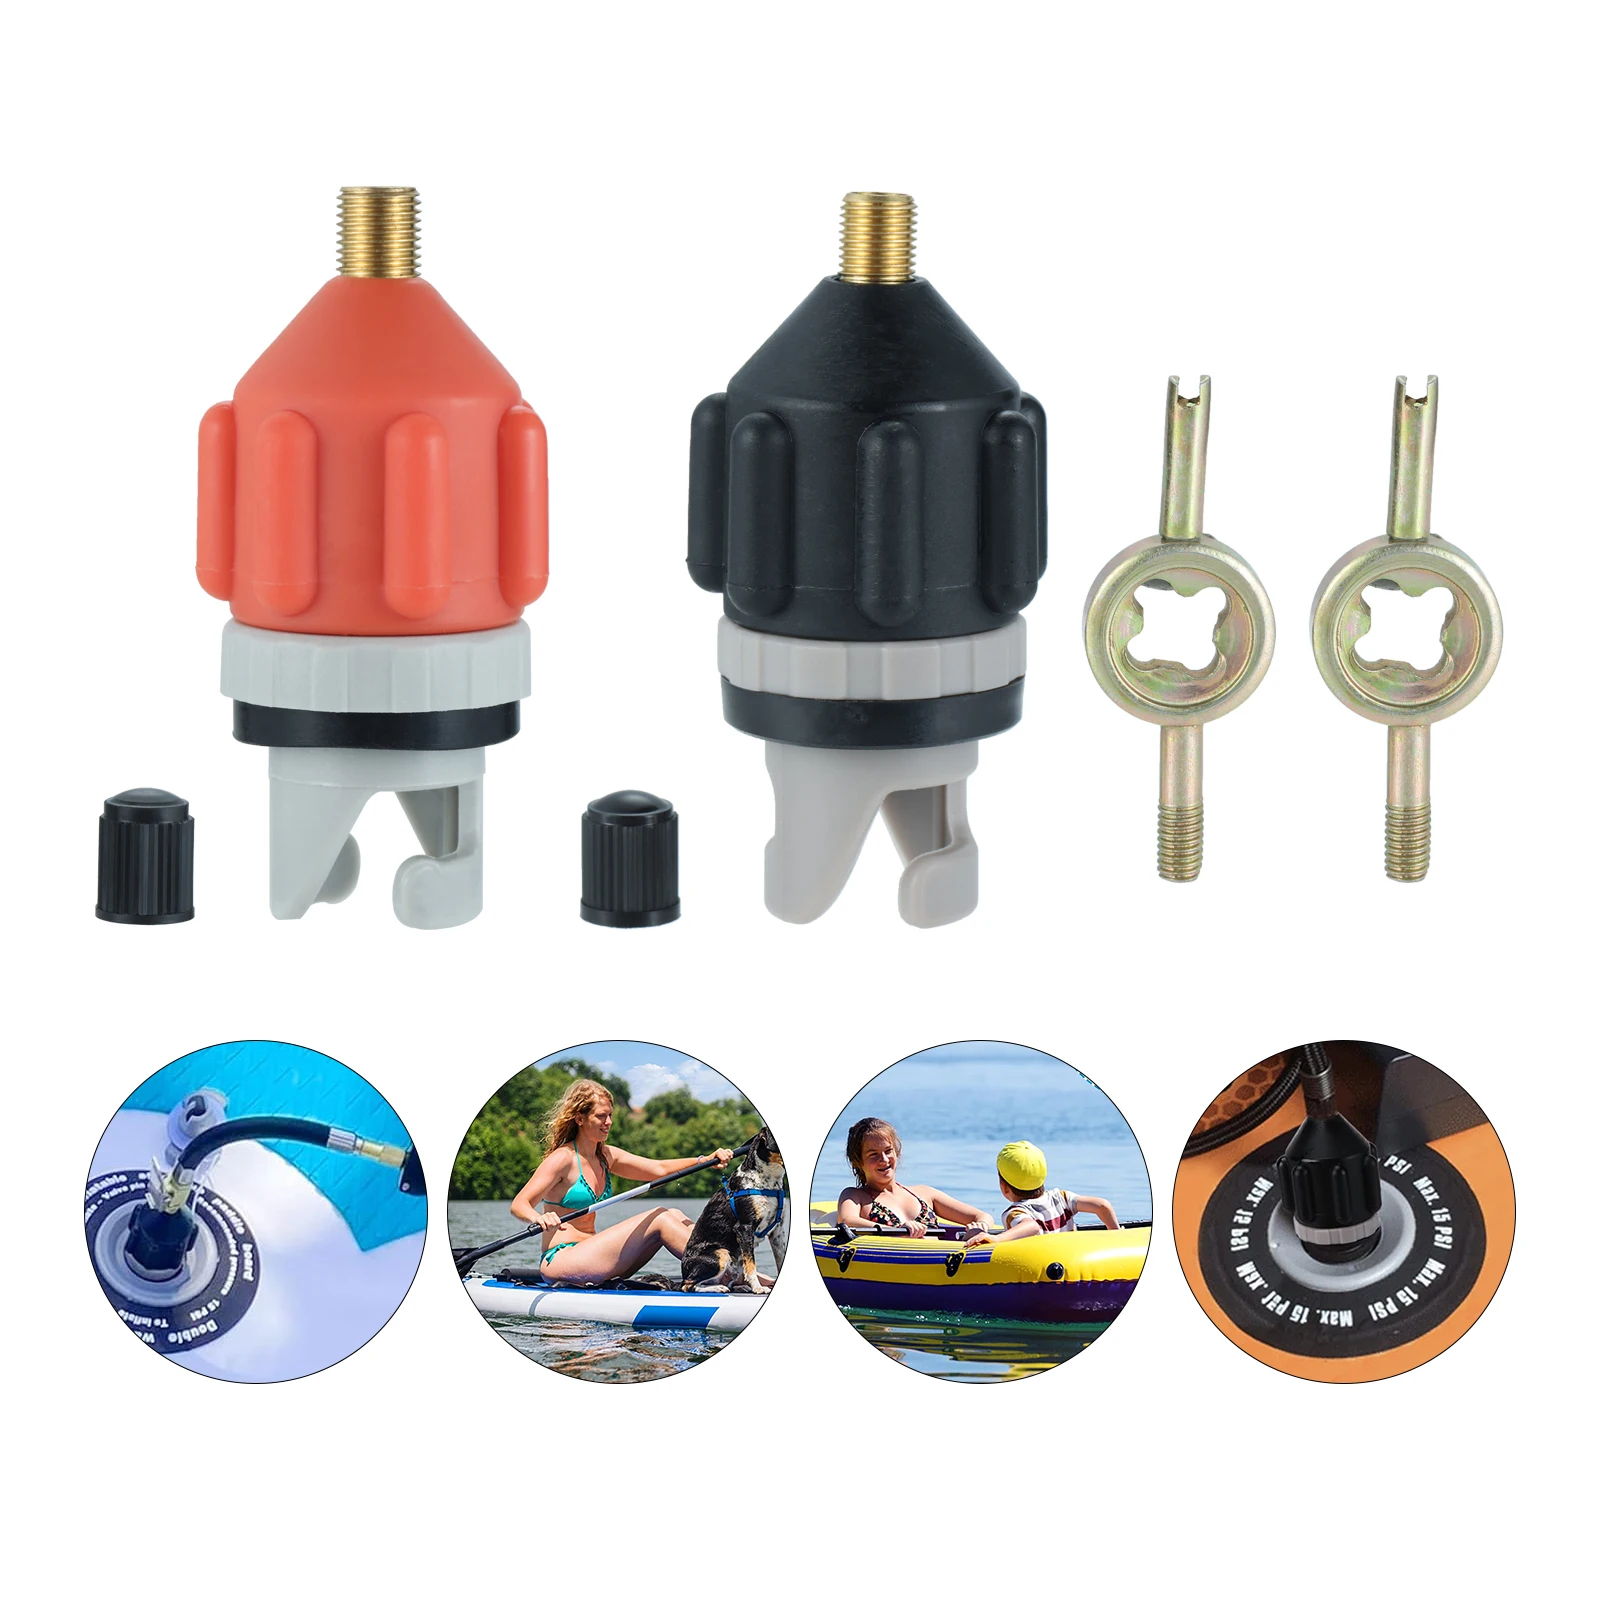 1 Set Air Valve Adapter with Valve-Core Wrenches 7.1cm Black/Orange Nylon Copper Inflatable Boats Kayaks Accessories Tools